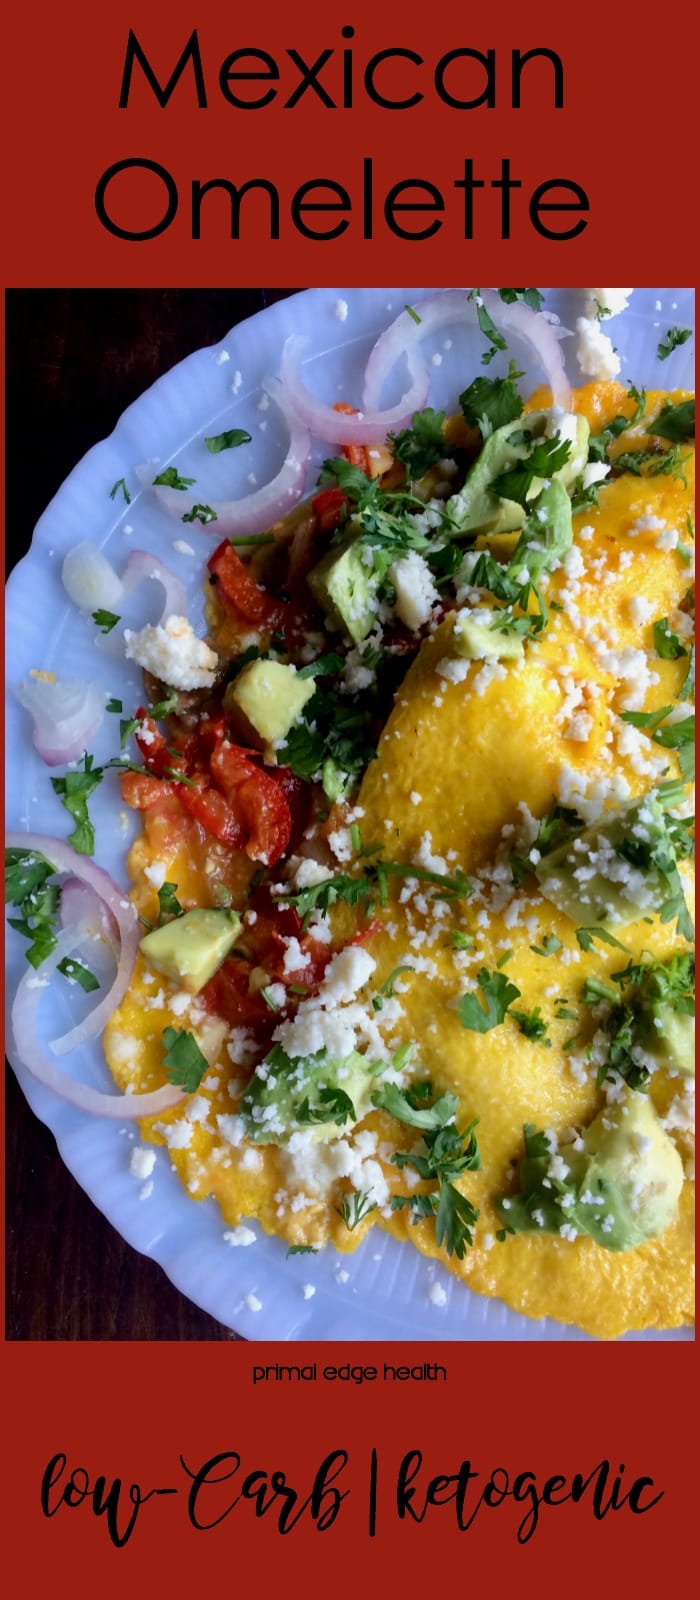 Mexican Omelette - Primal Edge Health